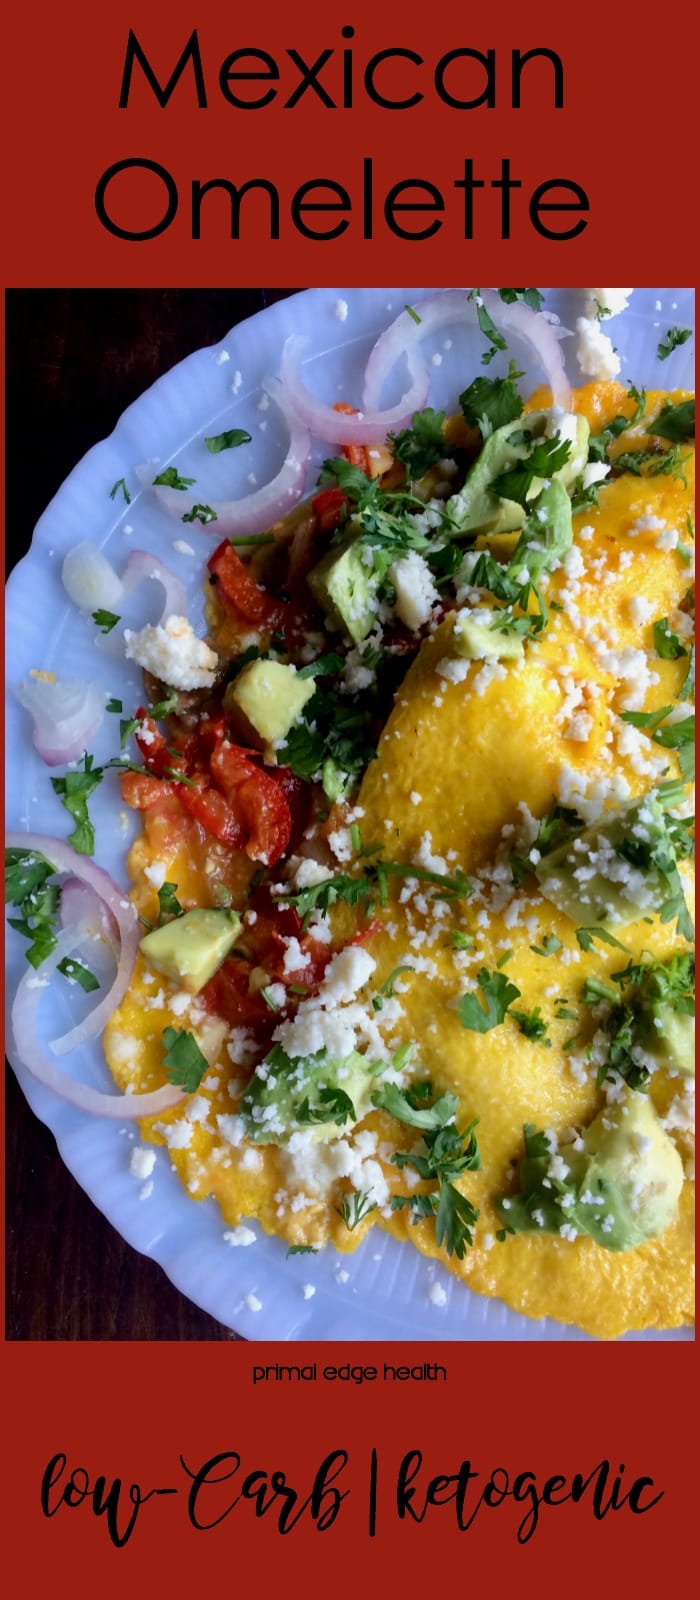 Mexican Omelette - Primal Edge Health